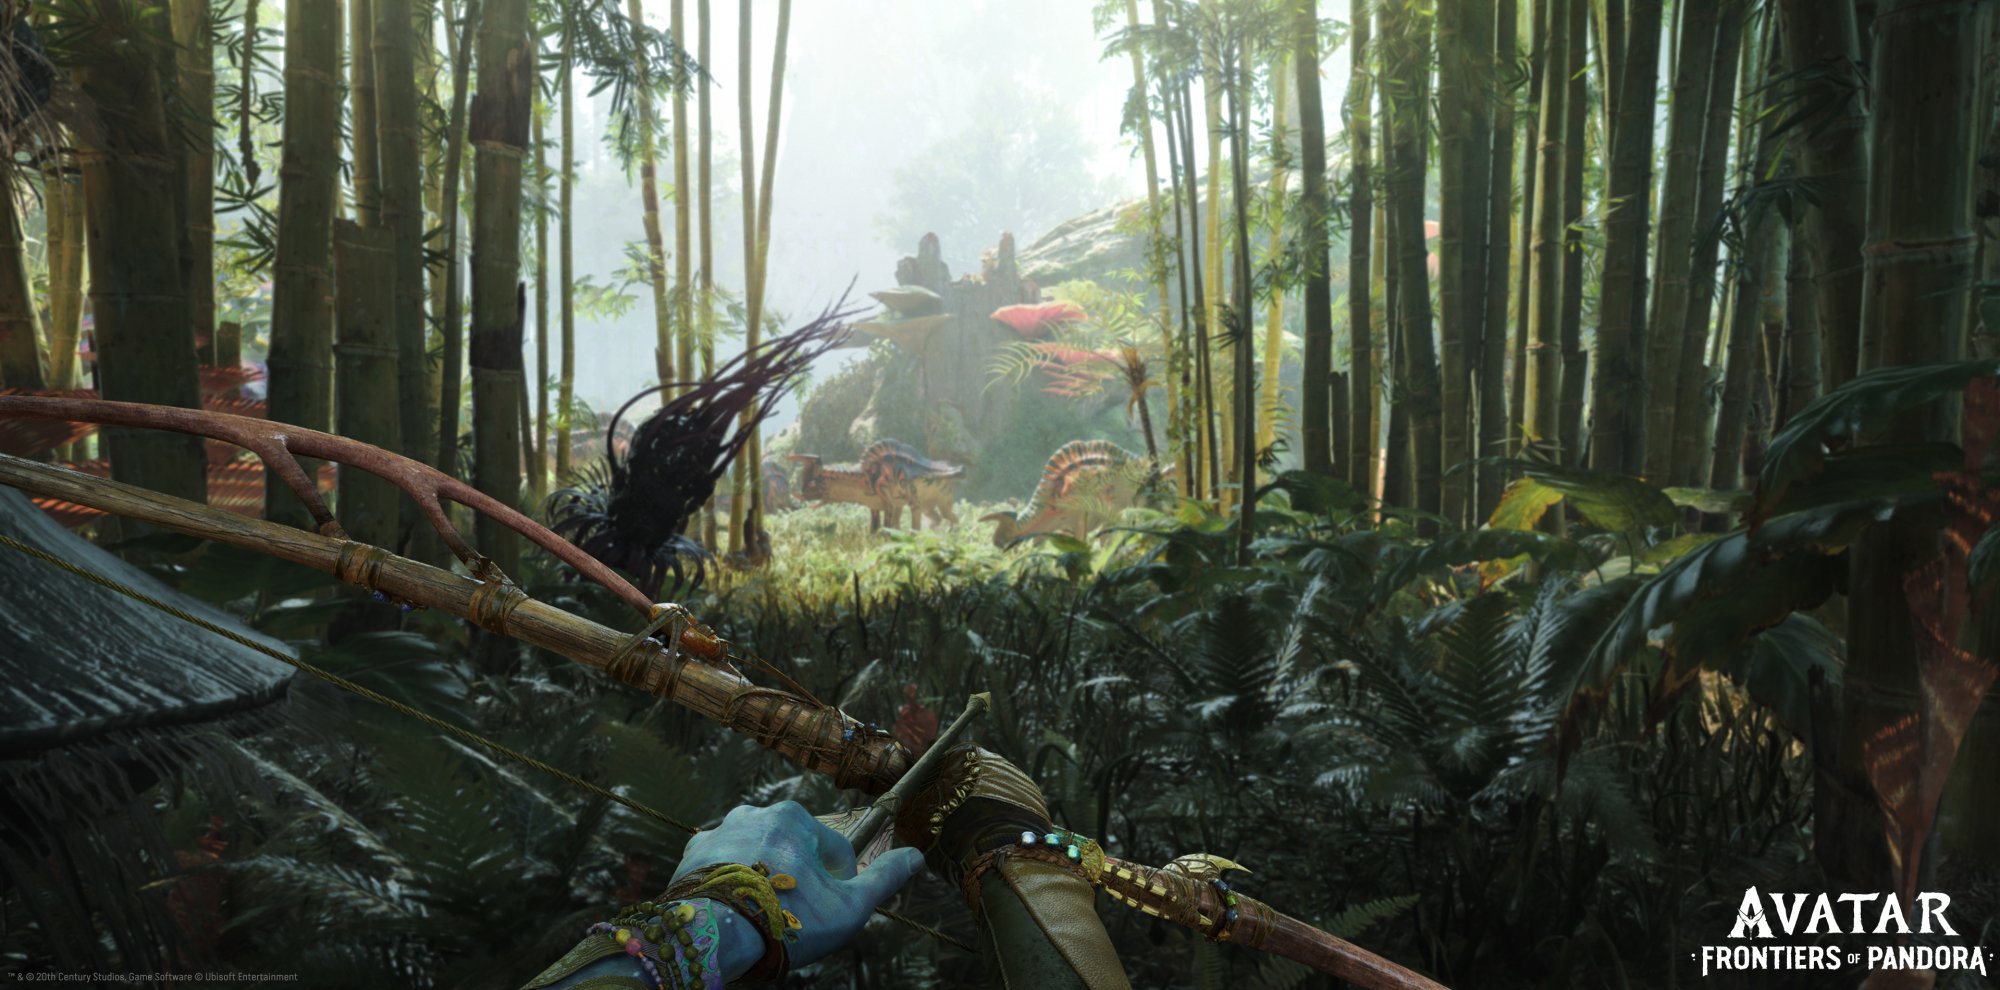 A na'vi sits in waiting in the forest with a bow and arrow